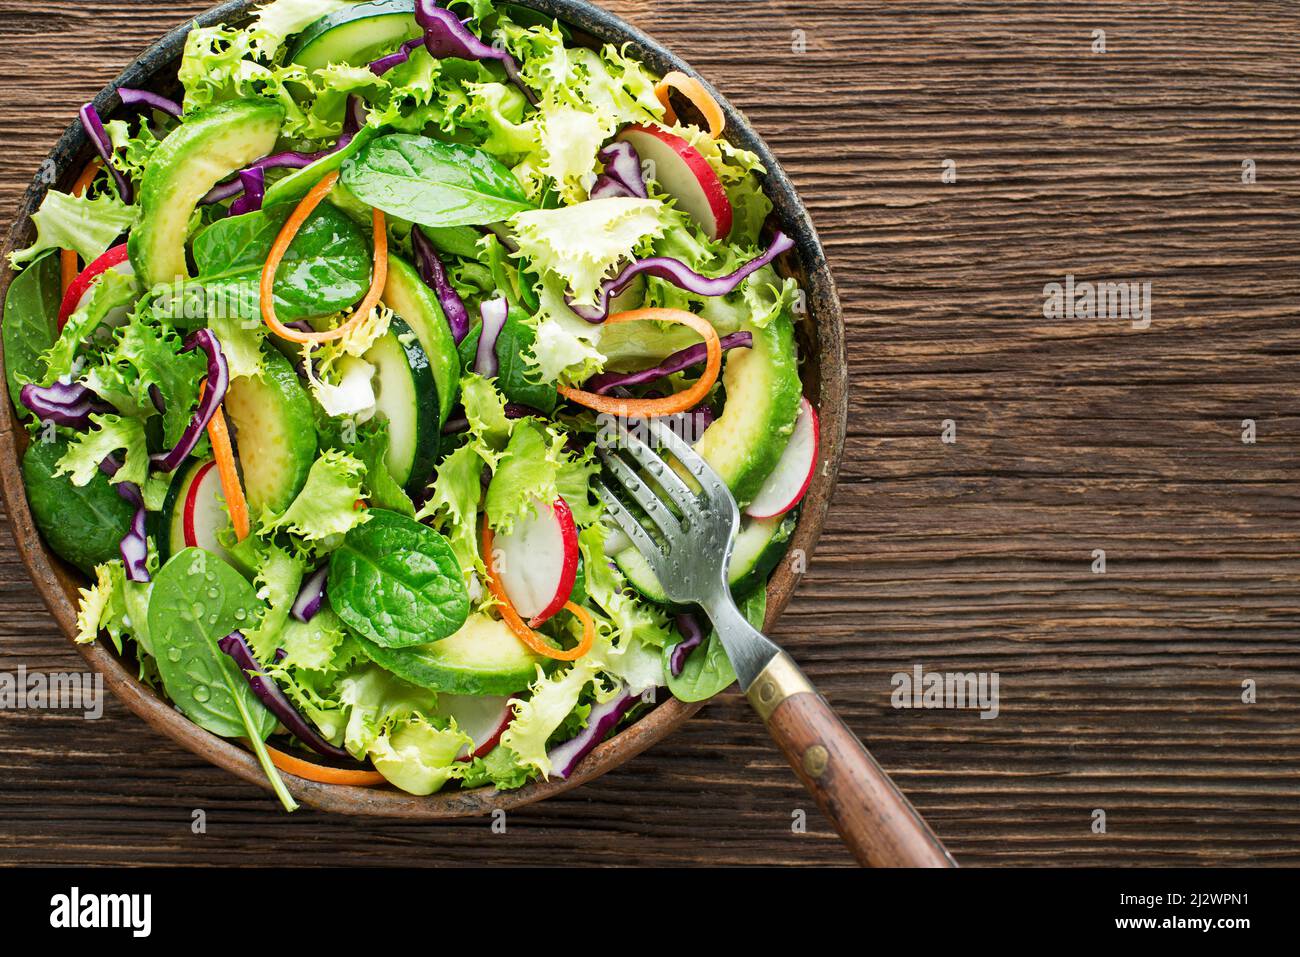 Green lettuce salad meal with avocado and fresh mixed vegetables on wooden table background Stock Photo